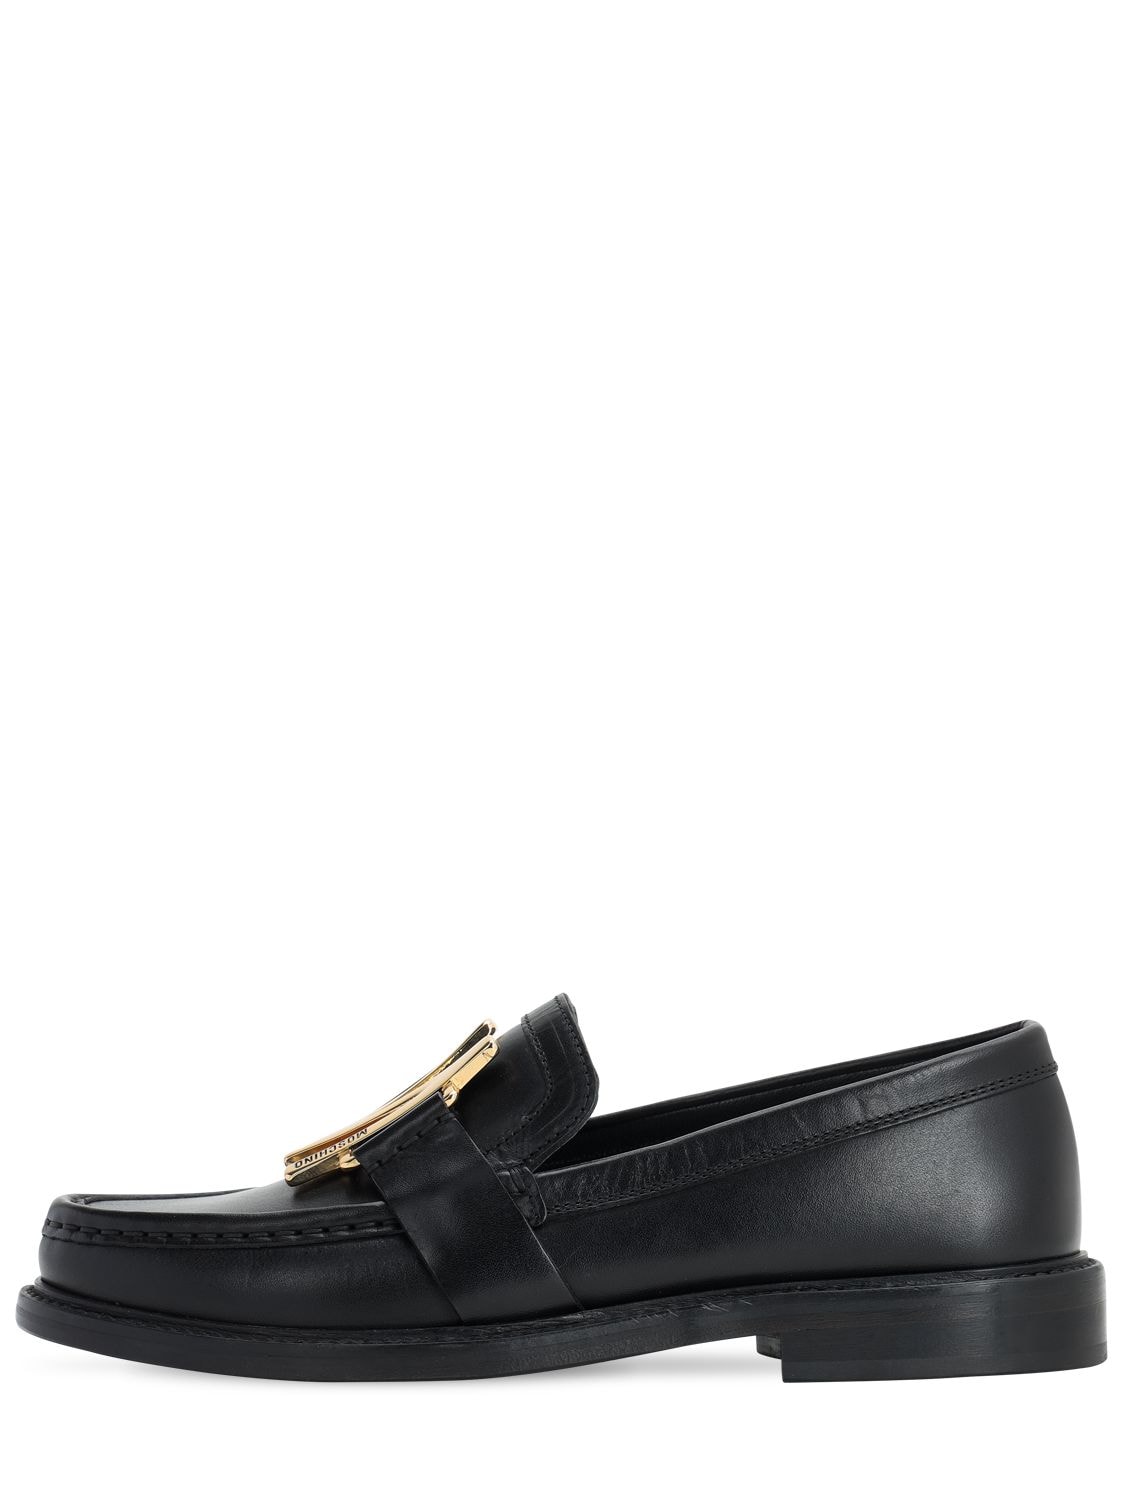 MOSCHINO 25MM LEATHER LOAFERS,72IAOF002-MDAW0